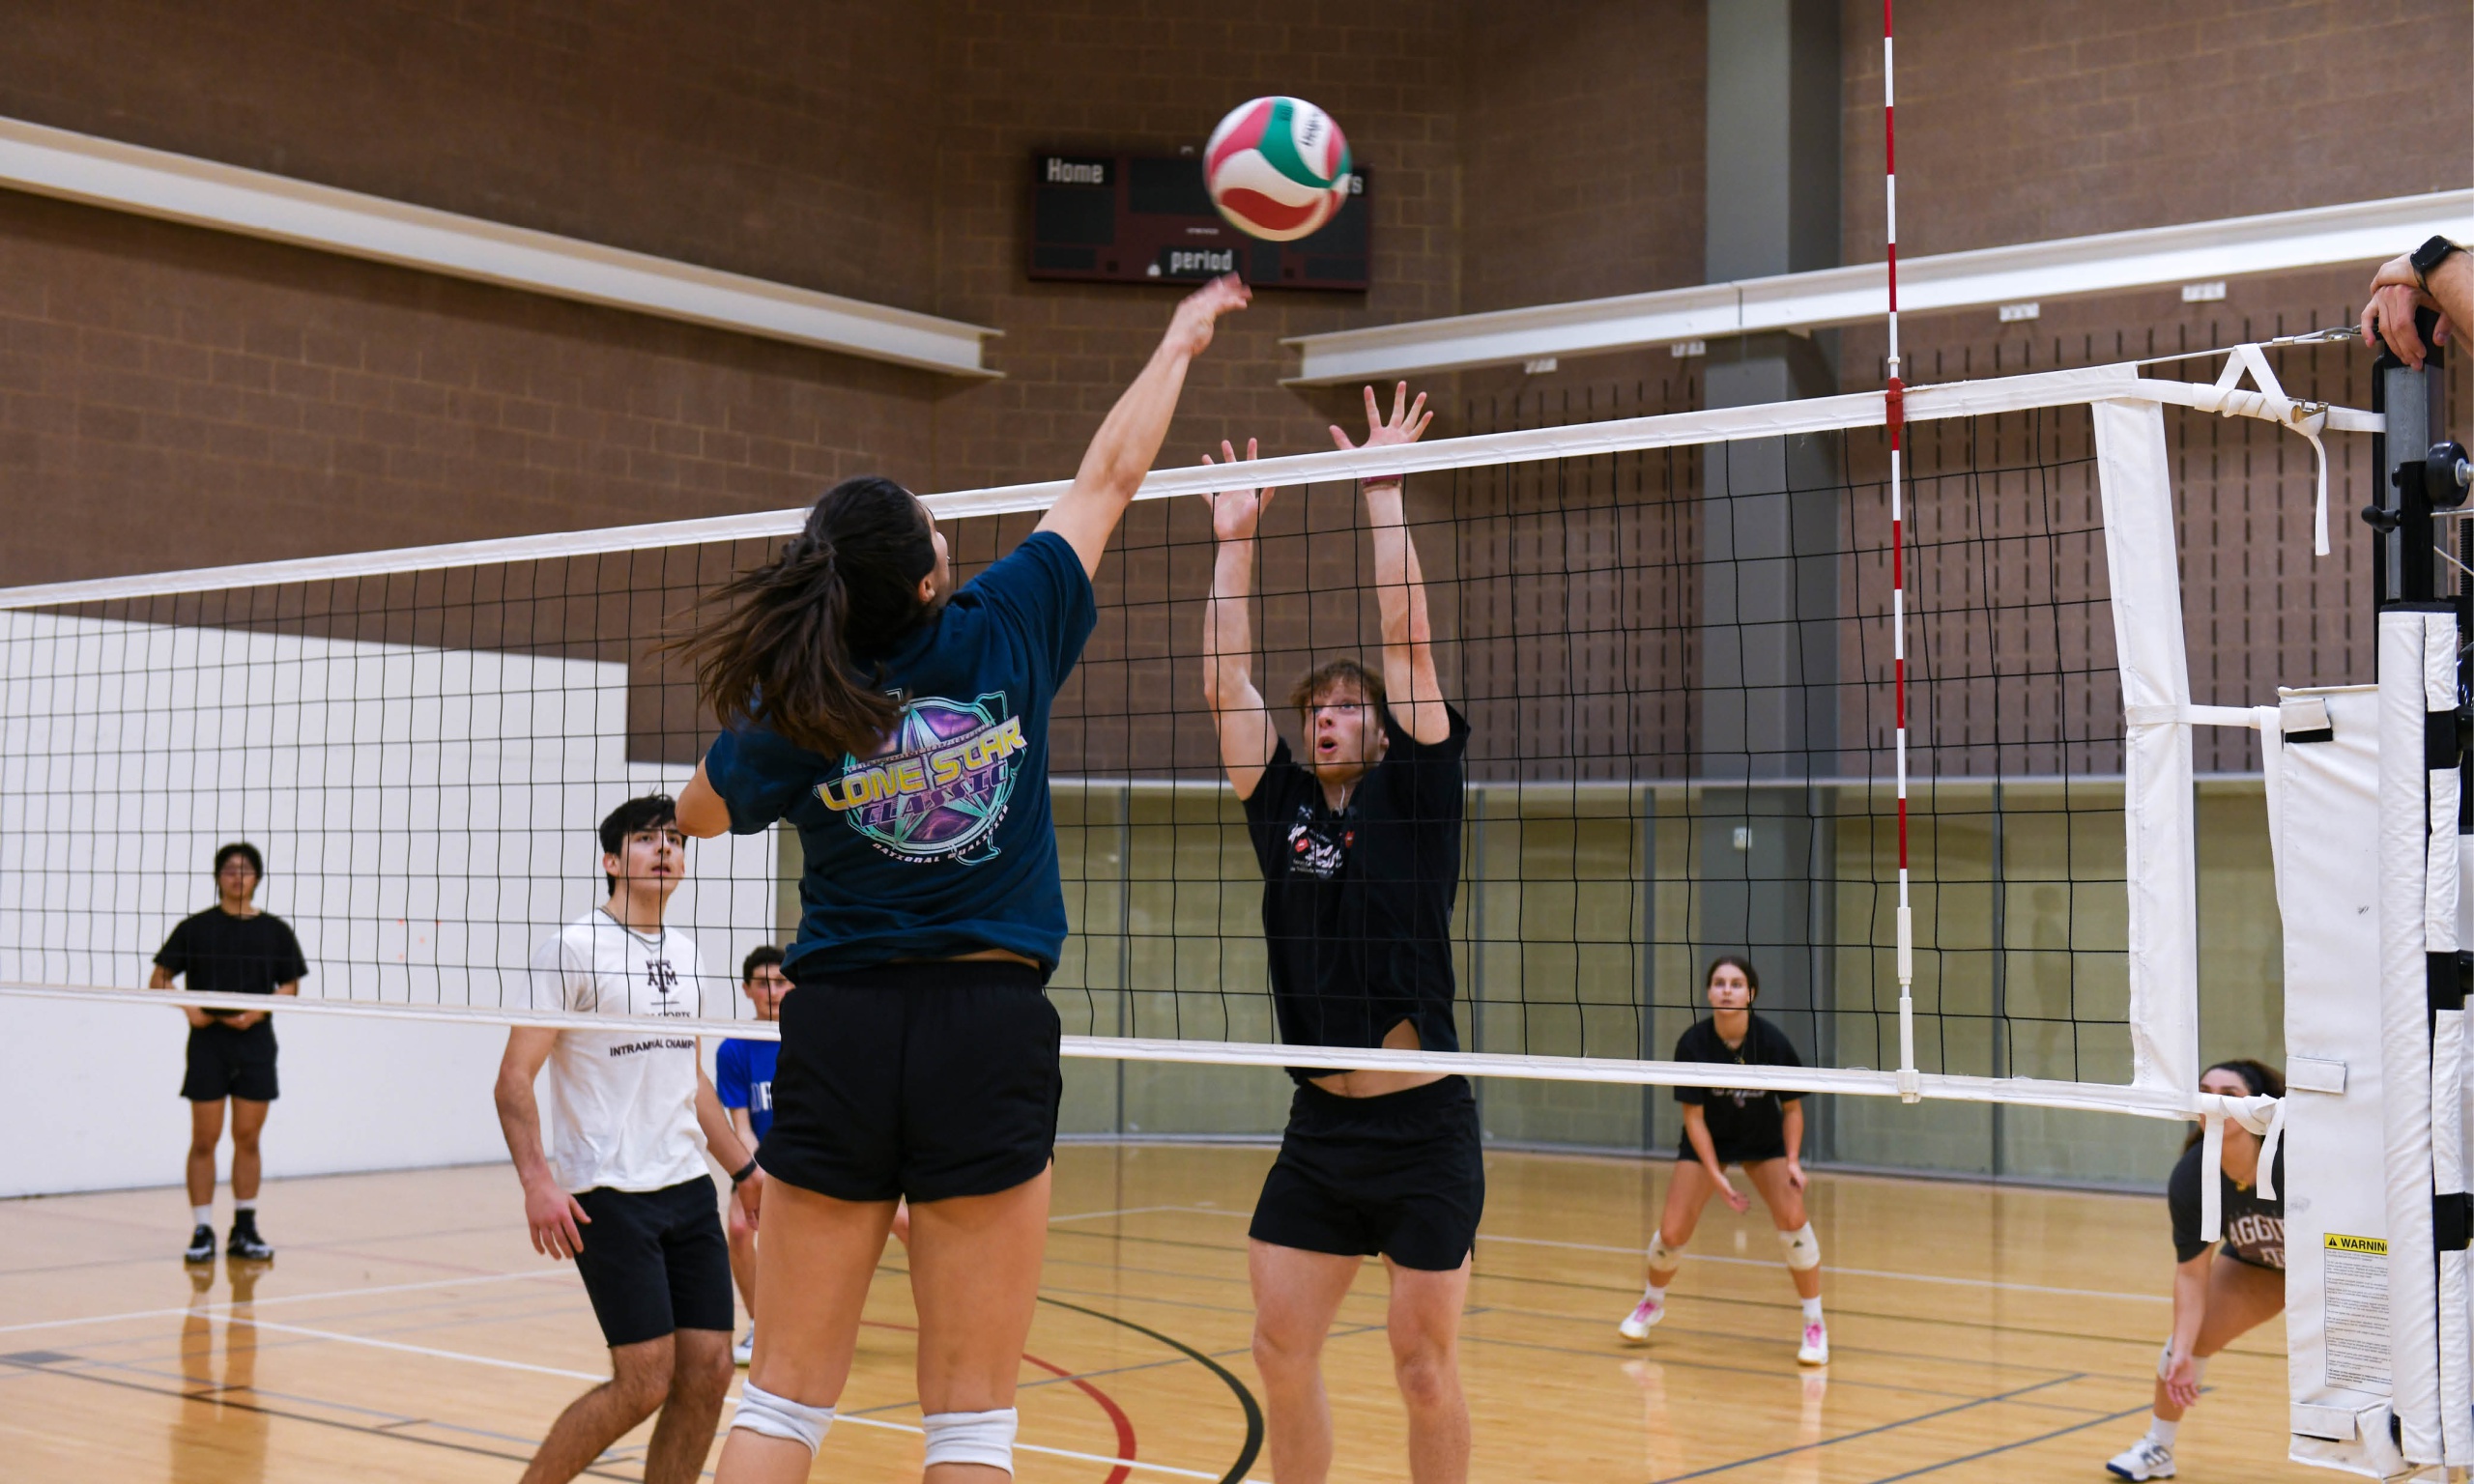 An athlete in action, extending their arm to make contact with the volleyball mid-air.